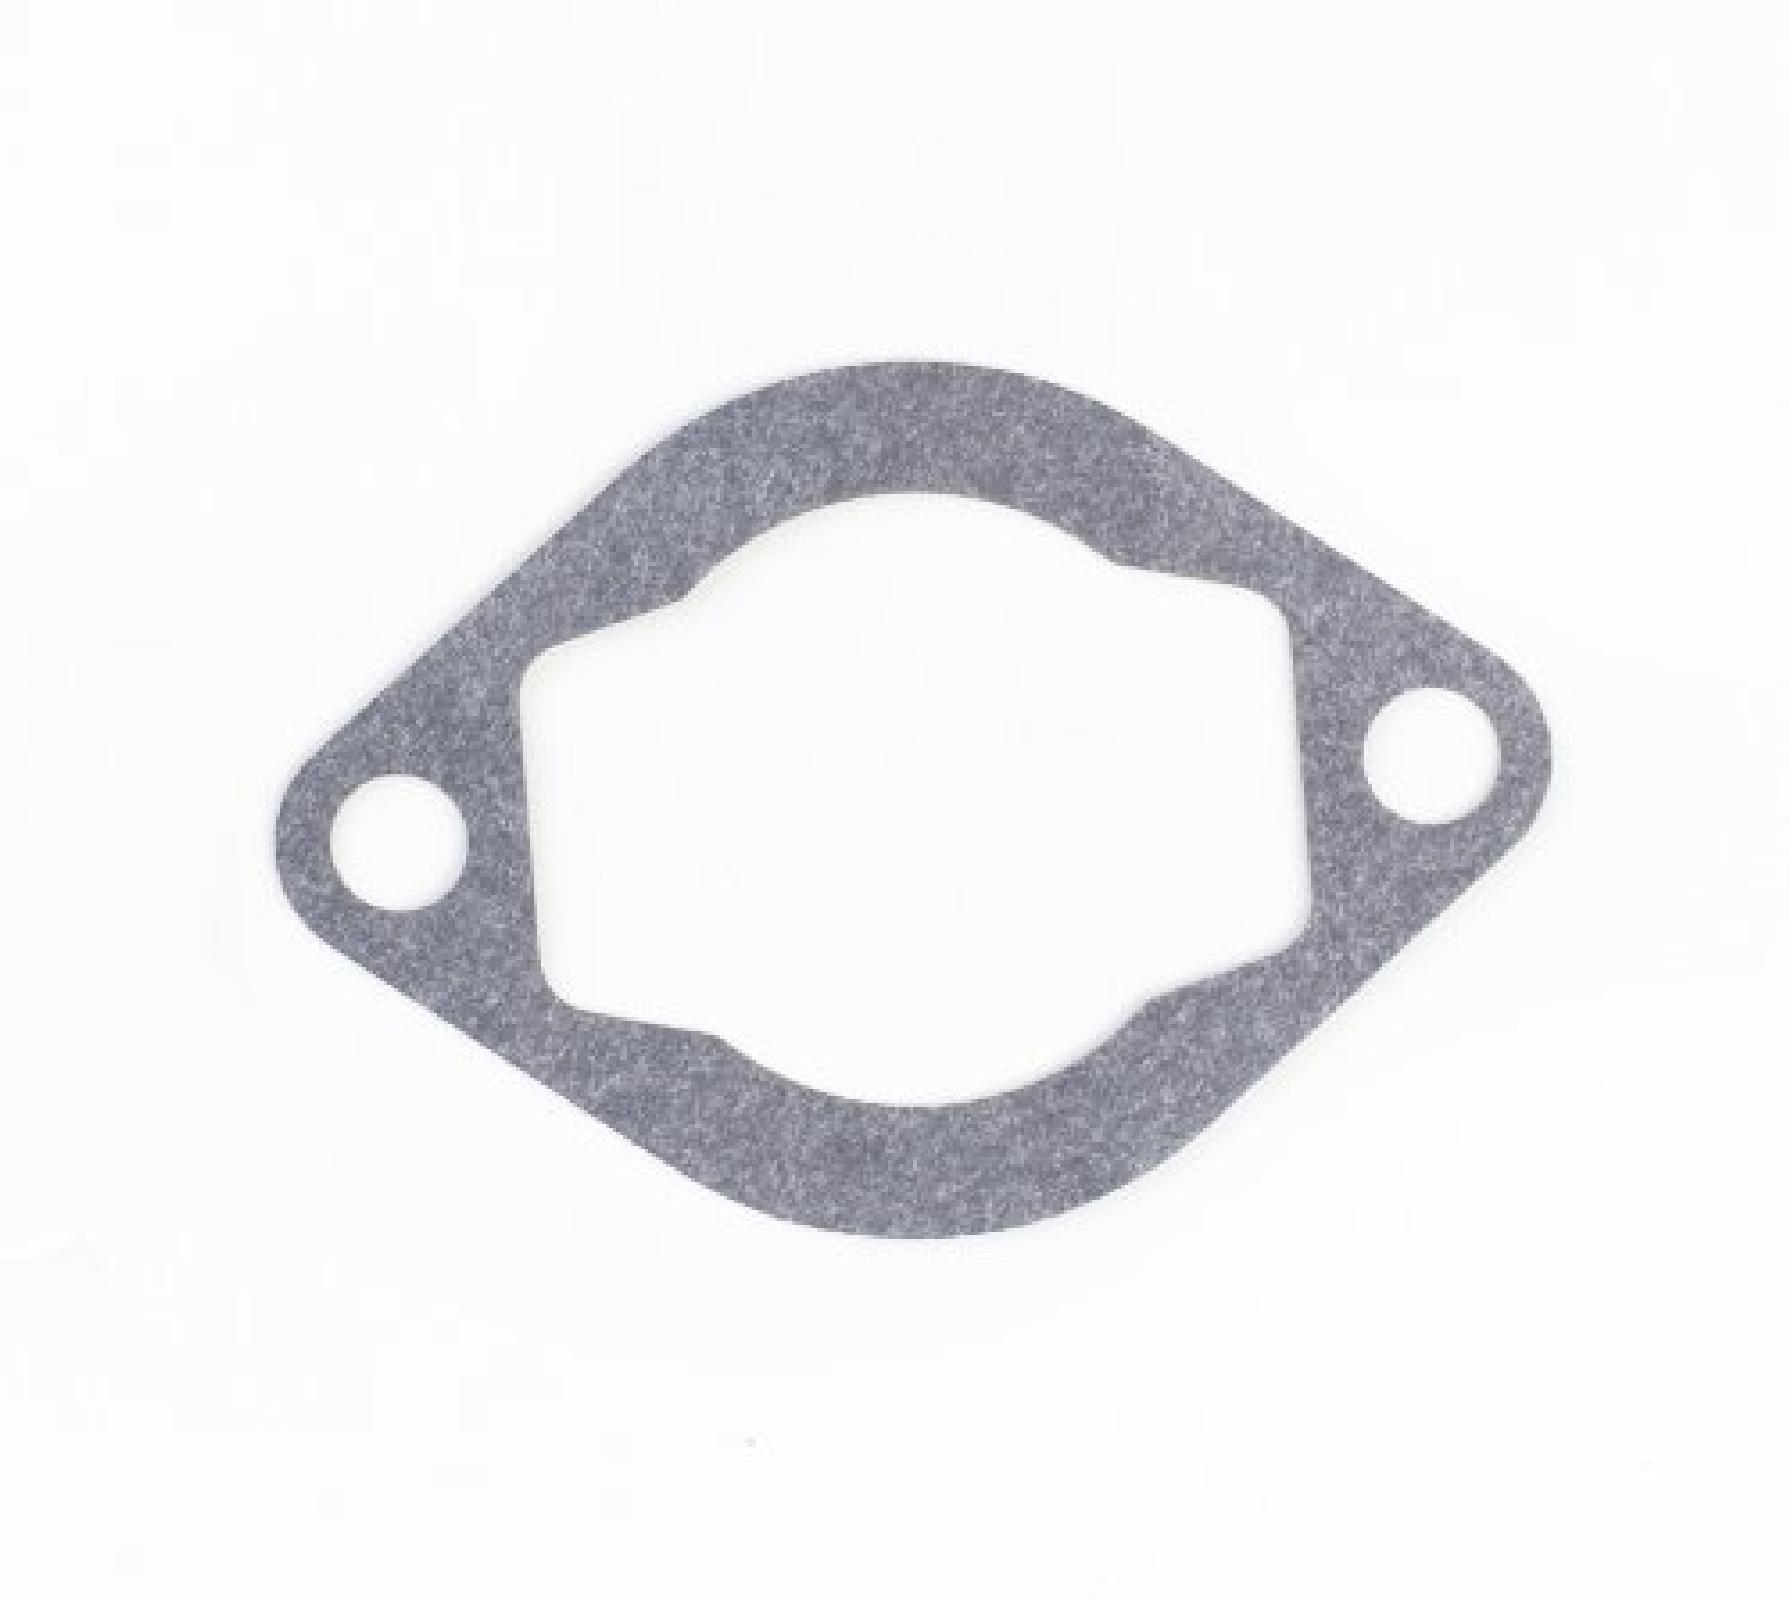 Briggs & Stratton Air Cleaner Gasket Replaces Old Briggs # 27310 - Click Image to Close